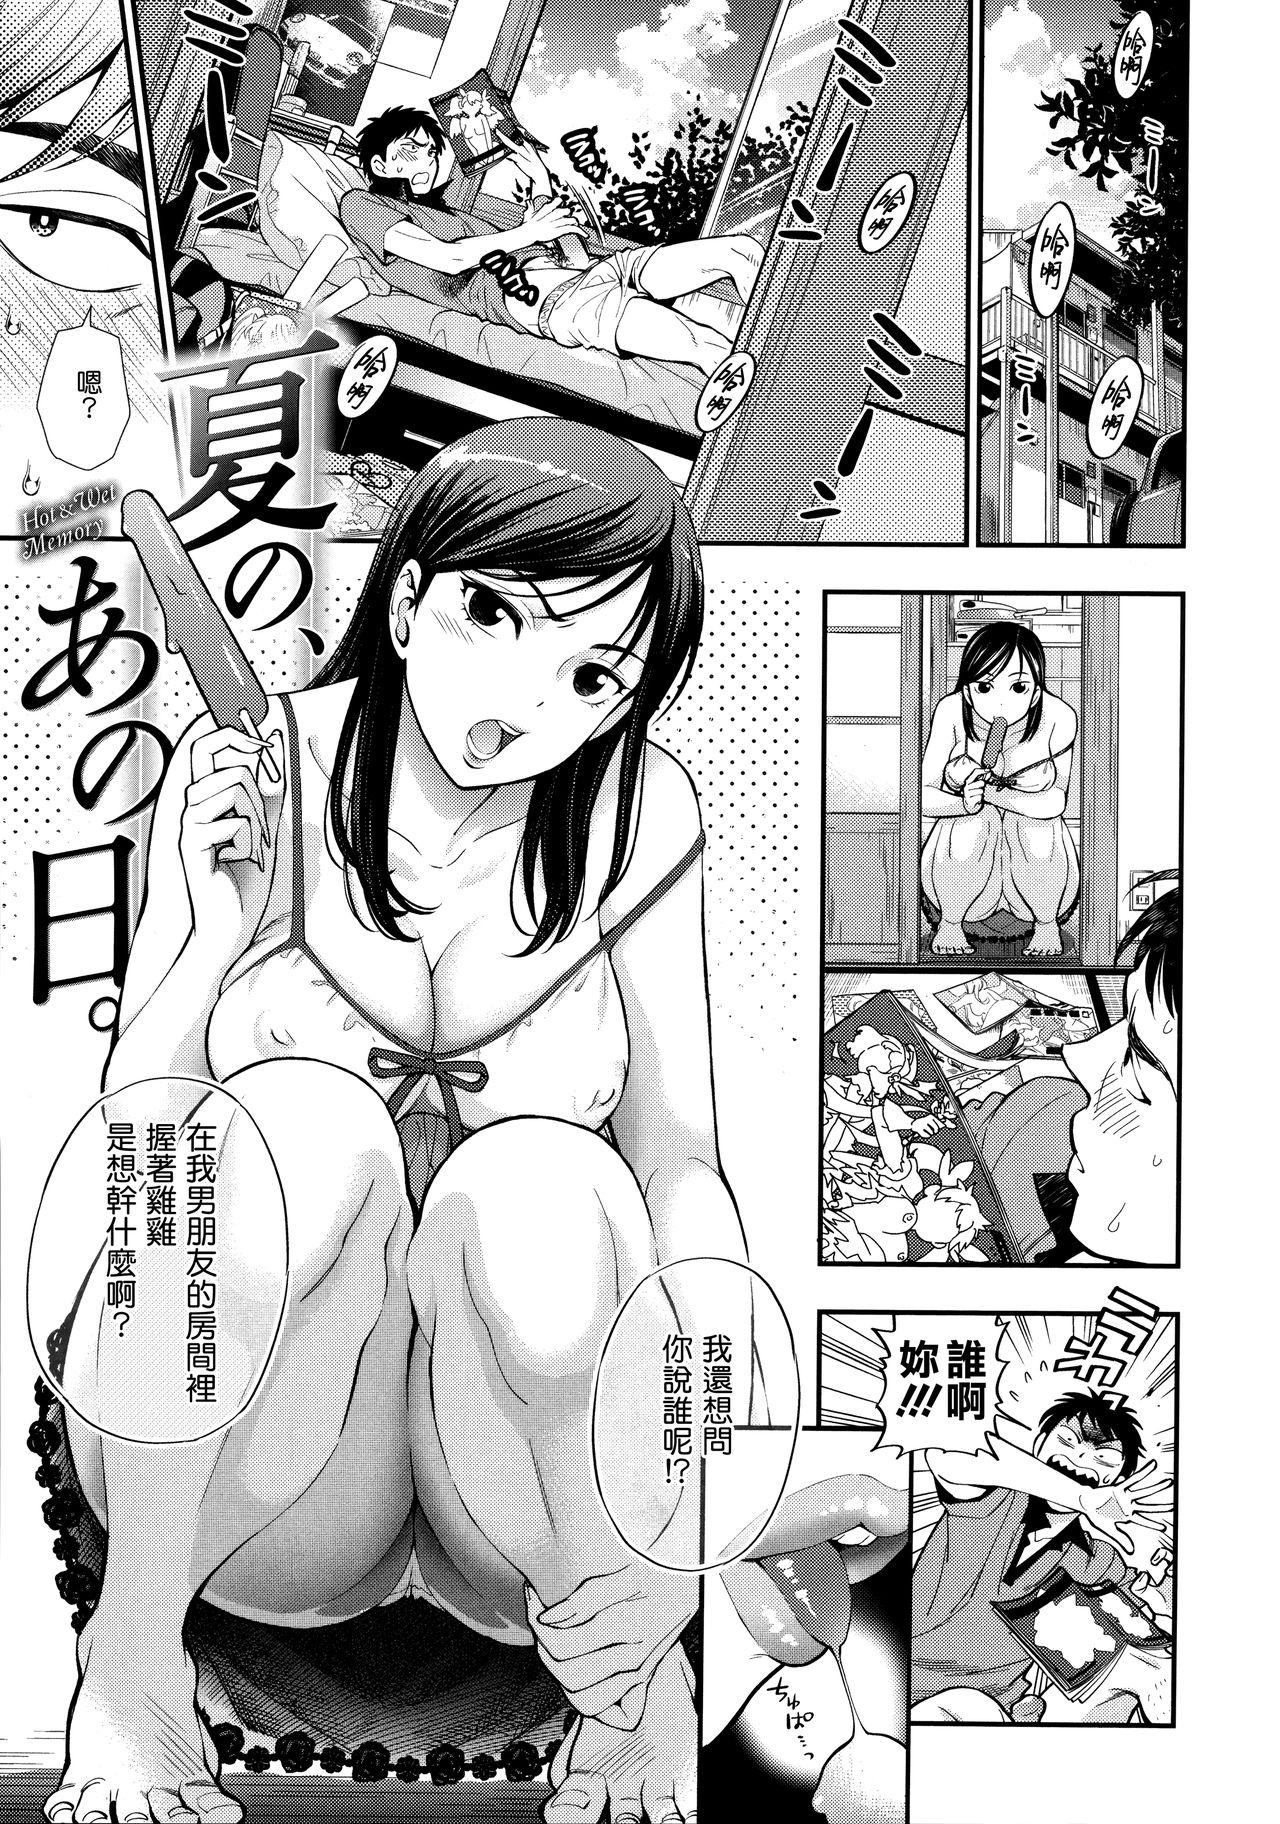 India Boku no Toshiue no Kanojo - so cute my adult honey 18 Year Old Porn - Page 6